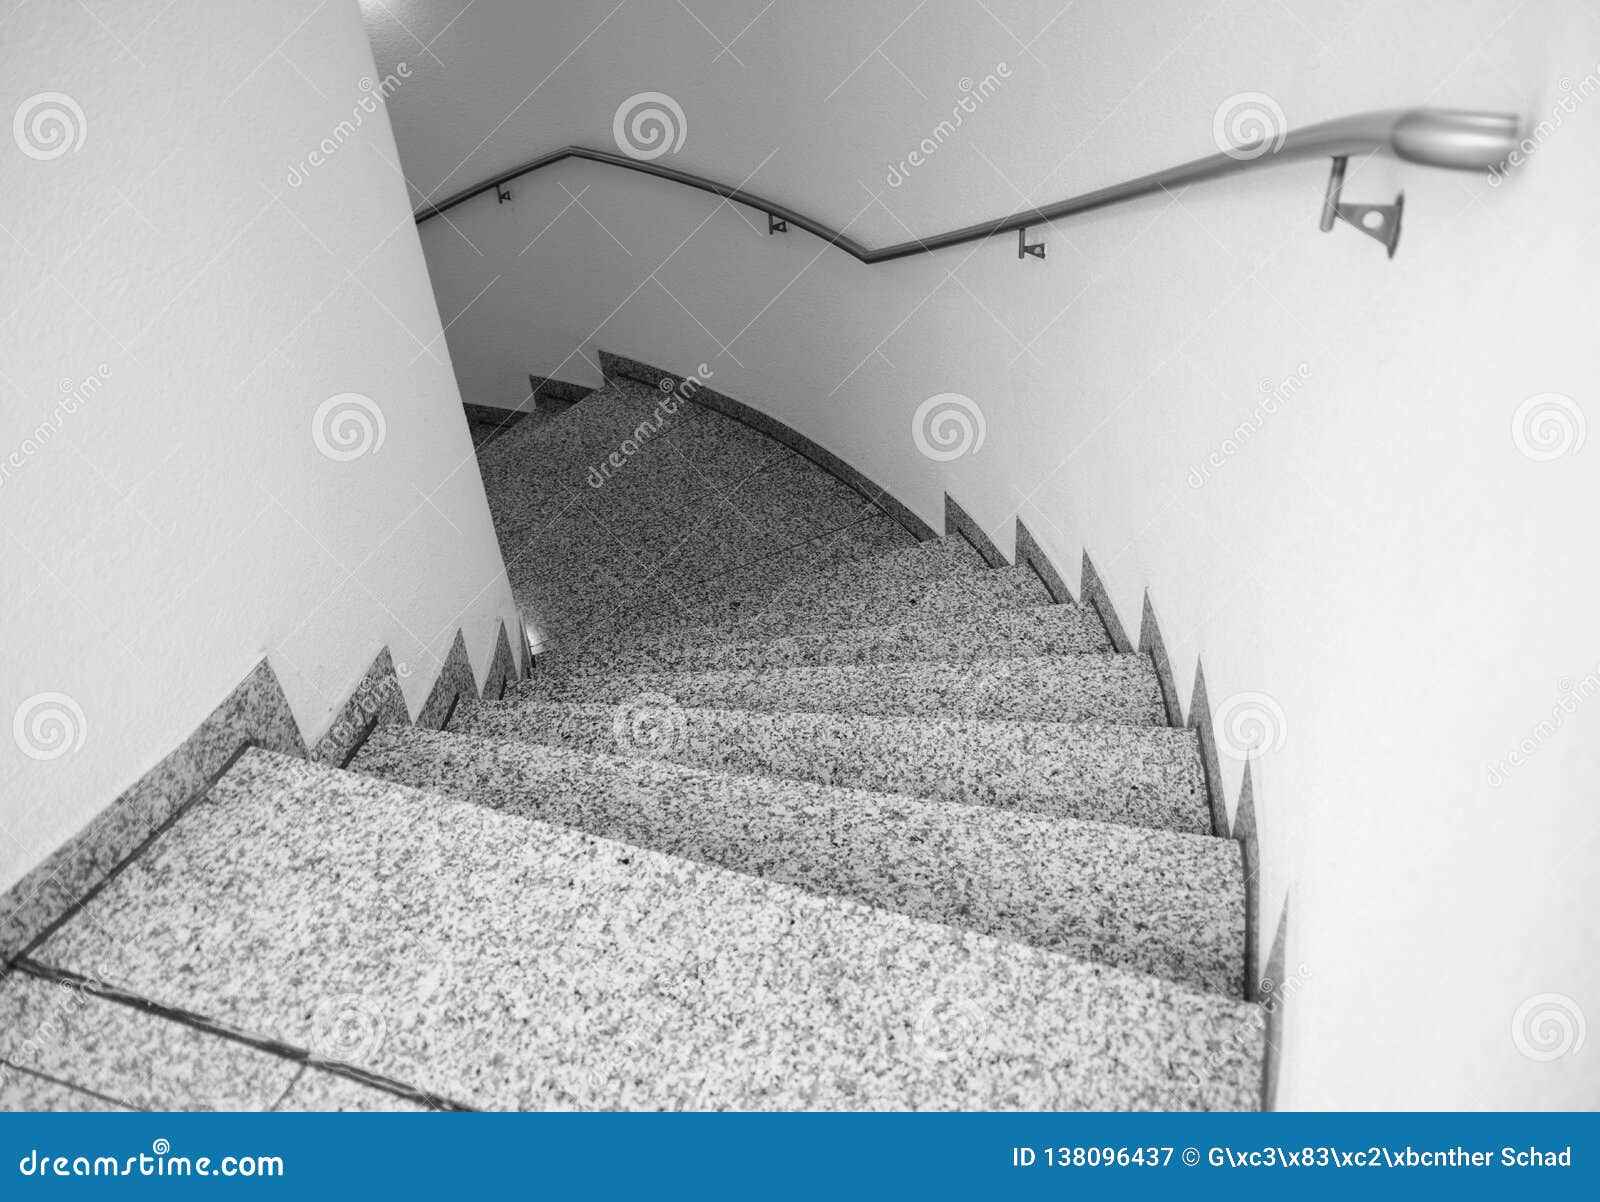 Modern Spiral Staircase In Black And White 2 Stock Image